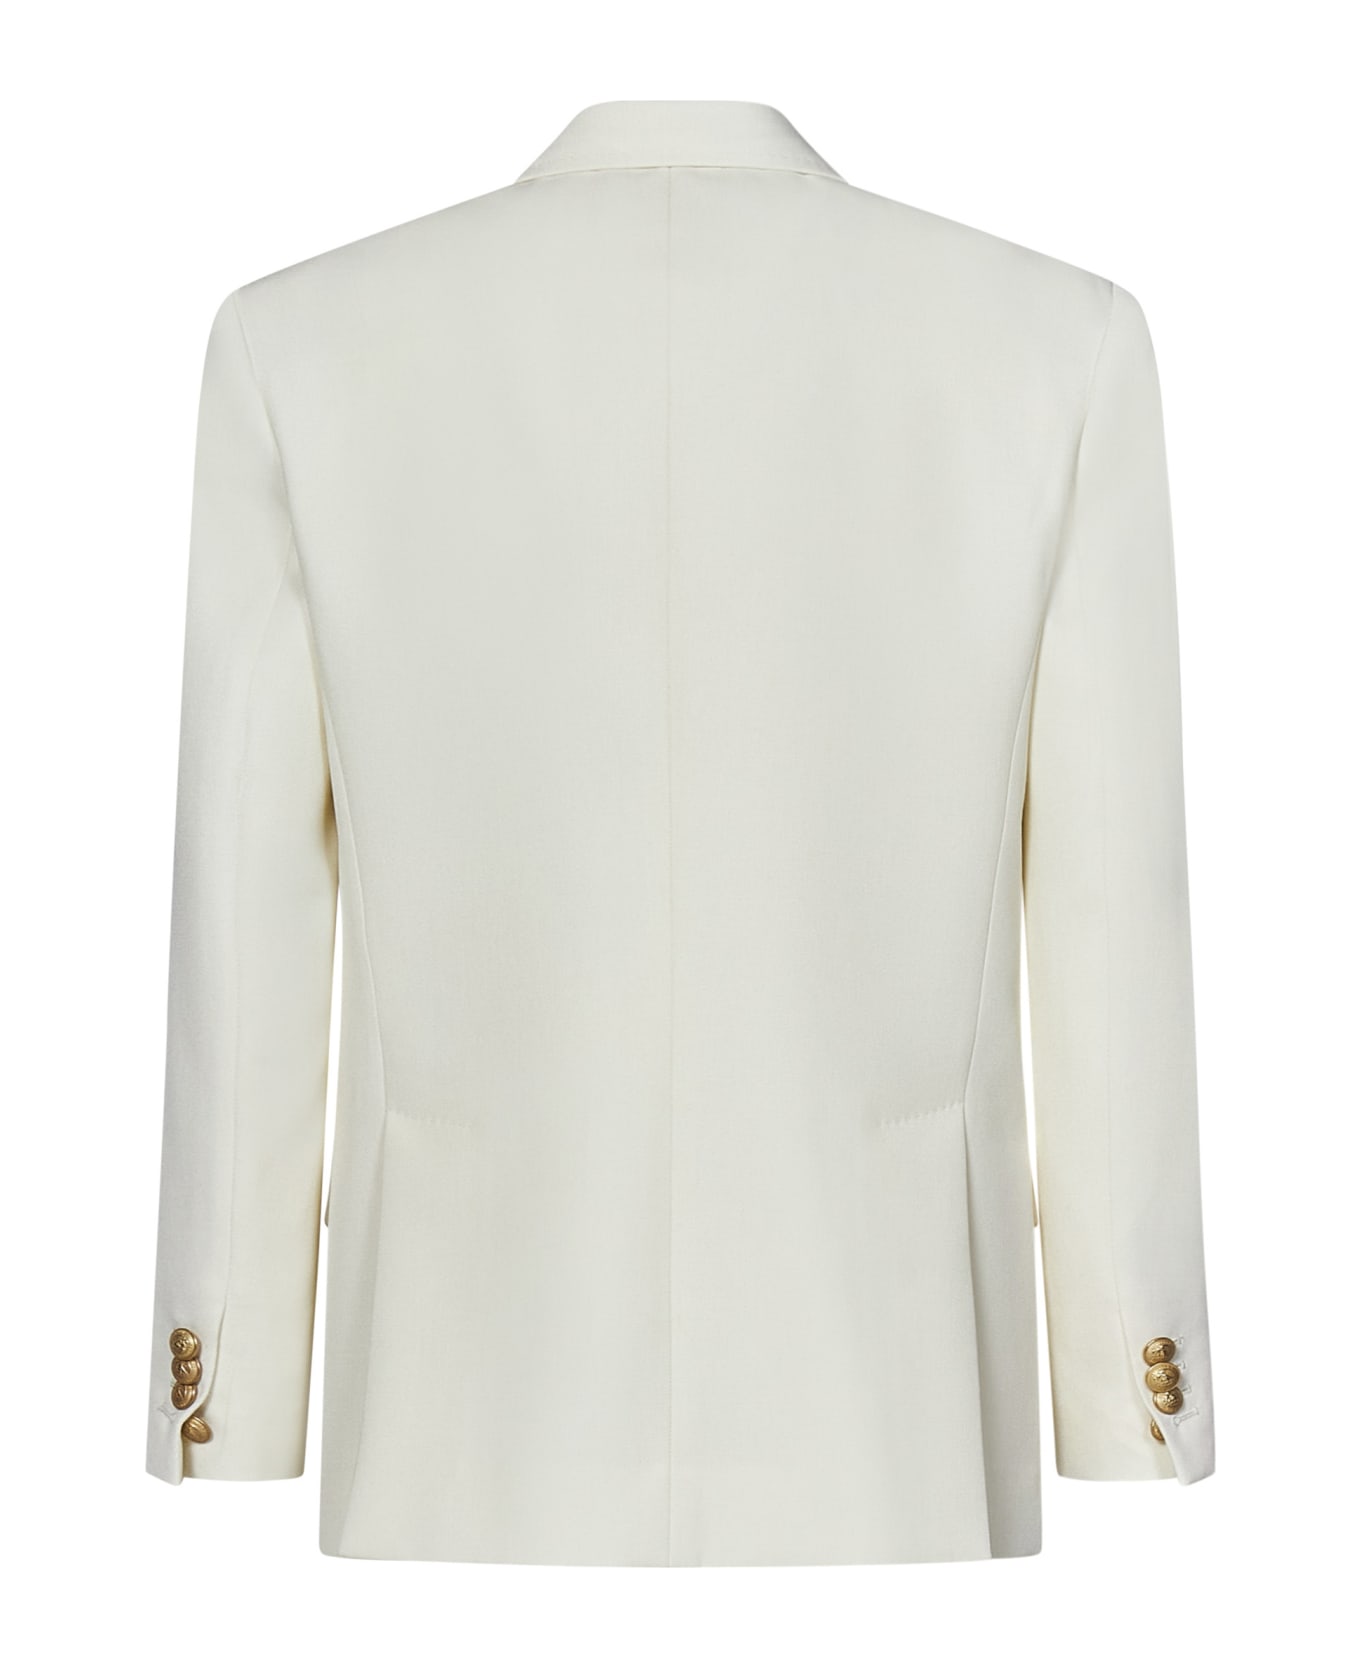 Dsquared2 Palm Beach Double-breasted Blazer - White